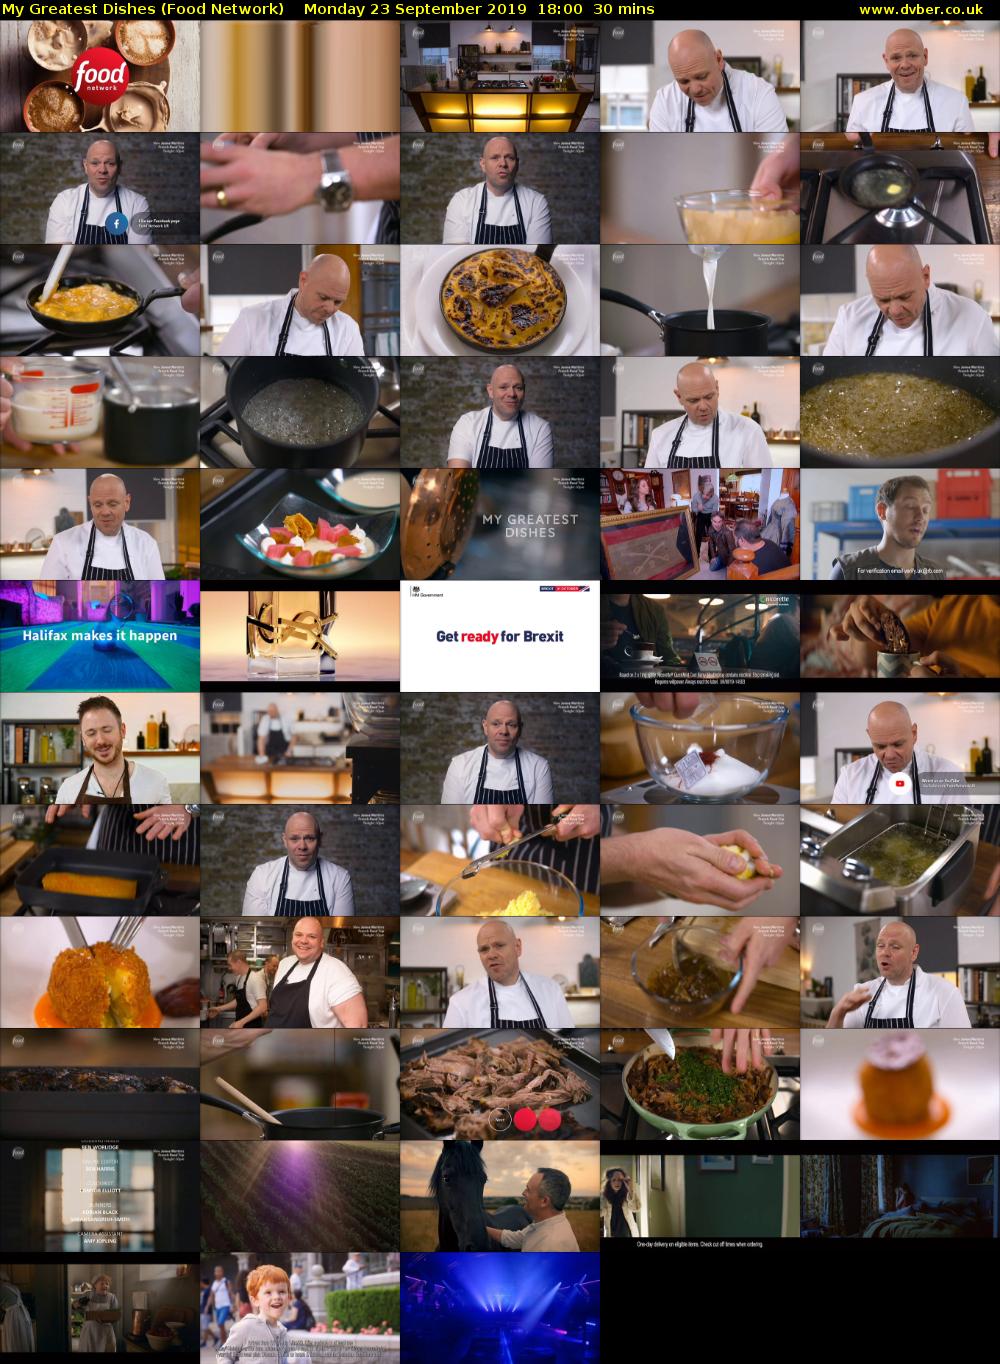 My Greatest Dishes (Food Network) Monday 23 September 2019 18:00 - 18:30